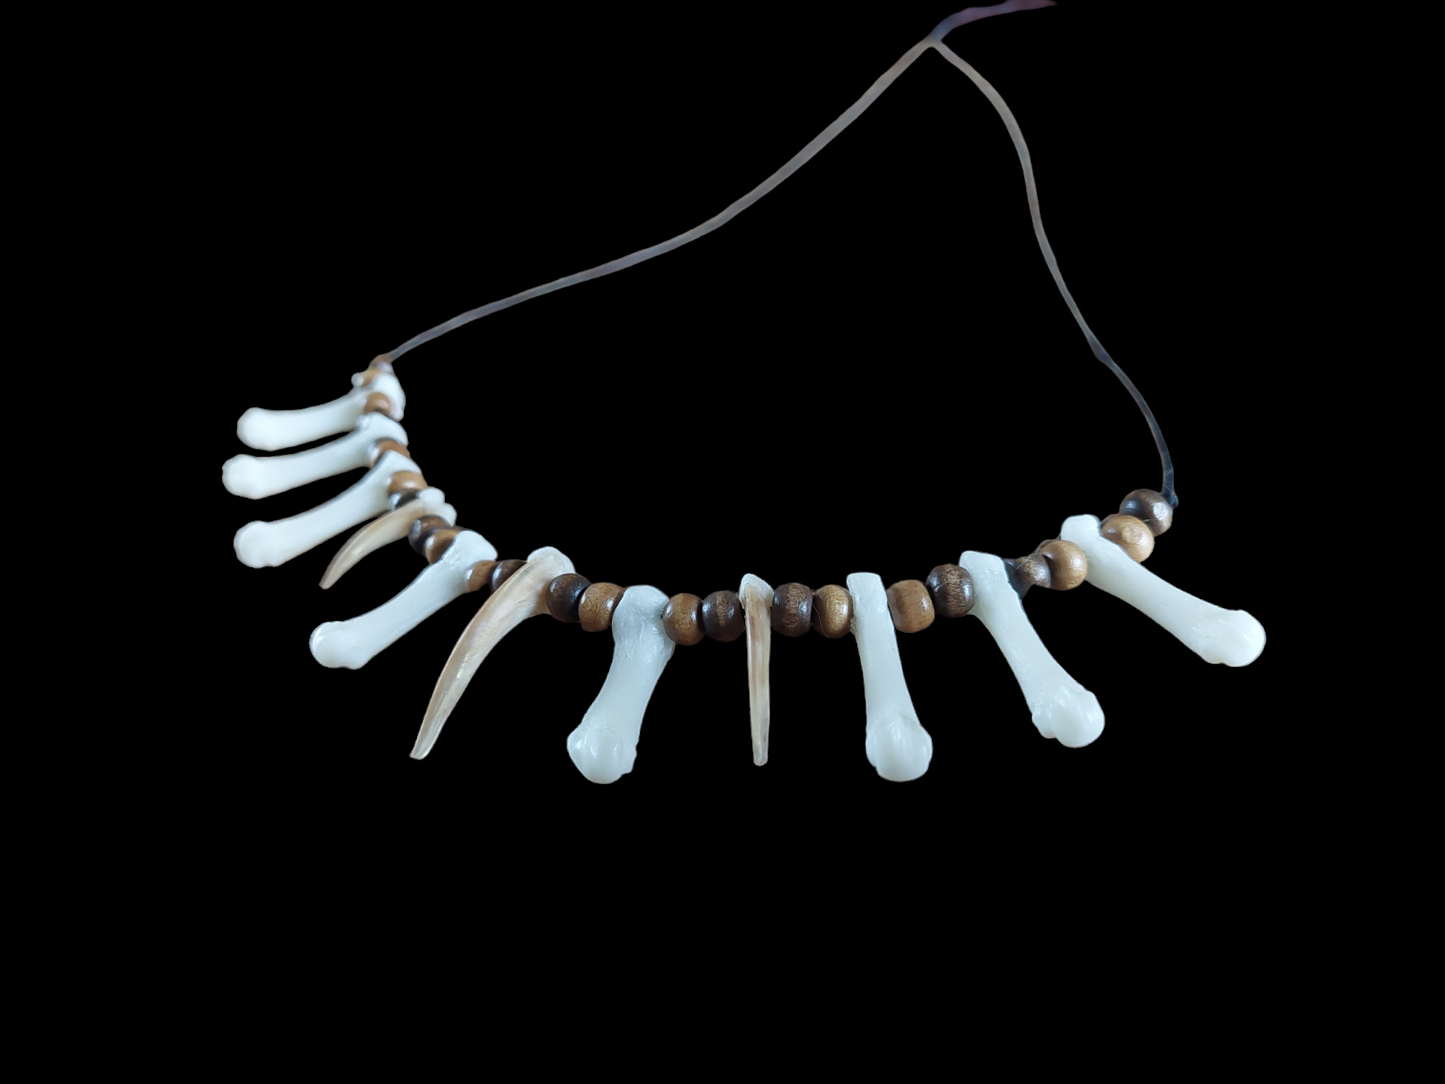 Badger claws and foot bones amulet necklace